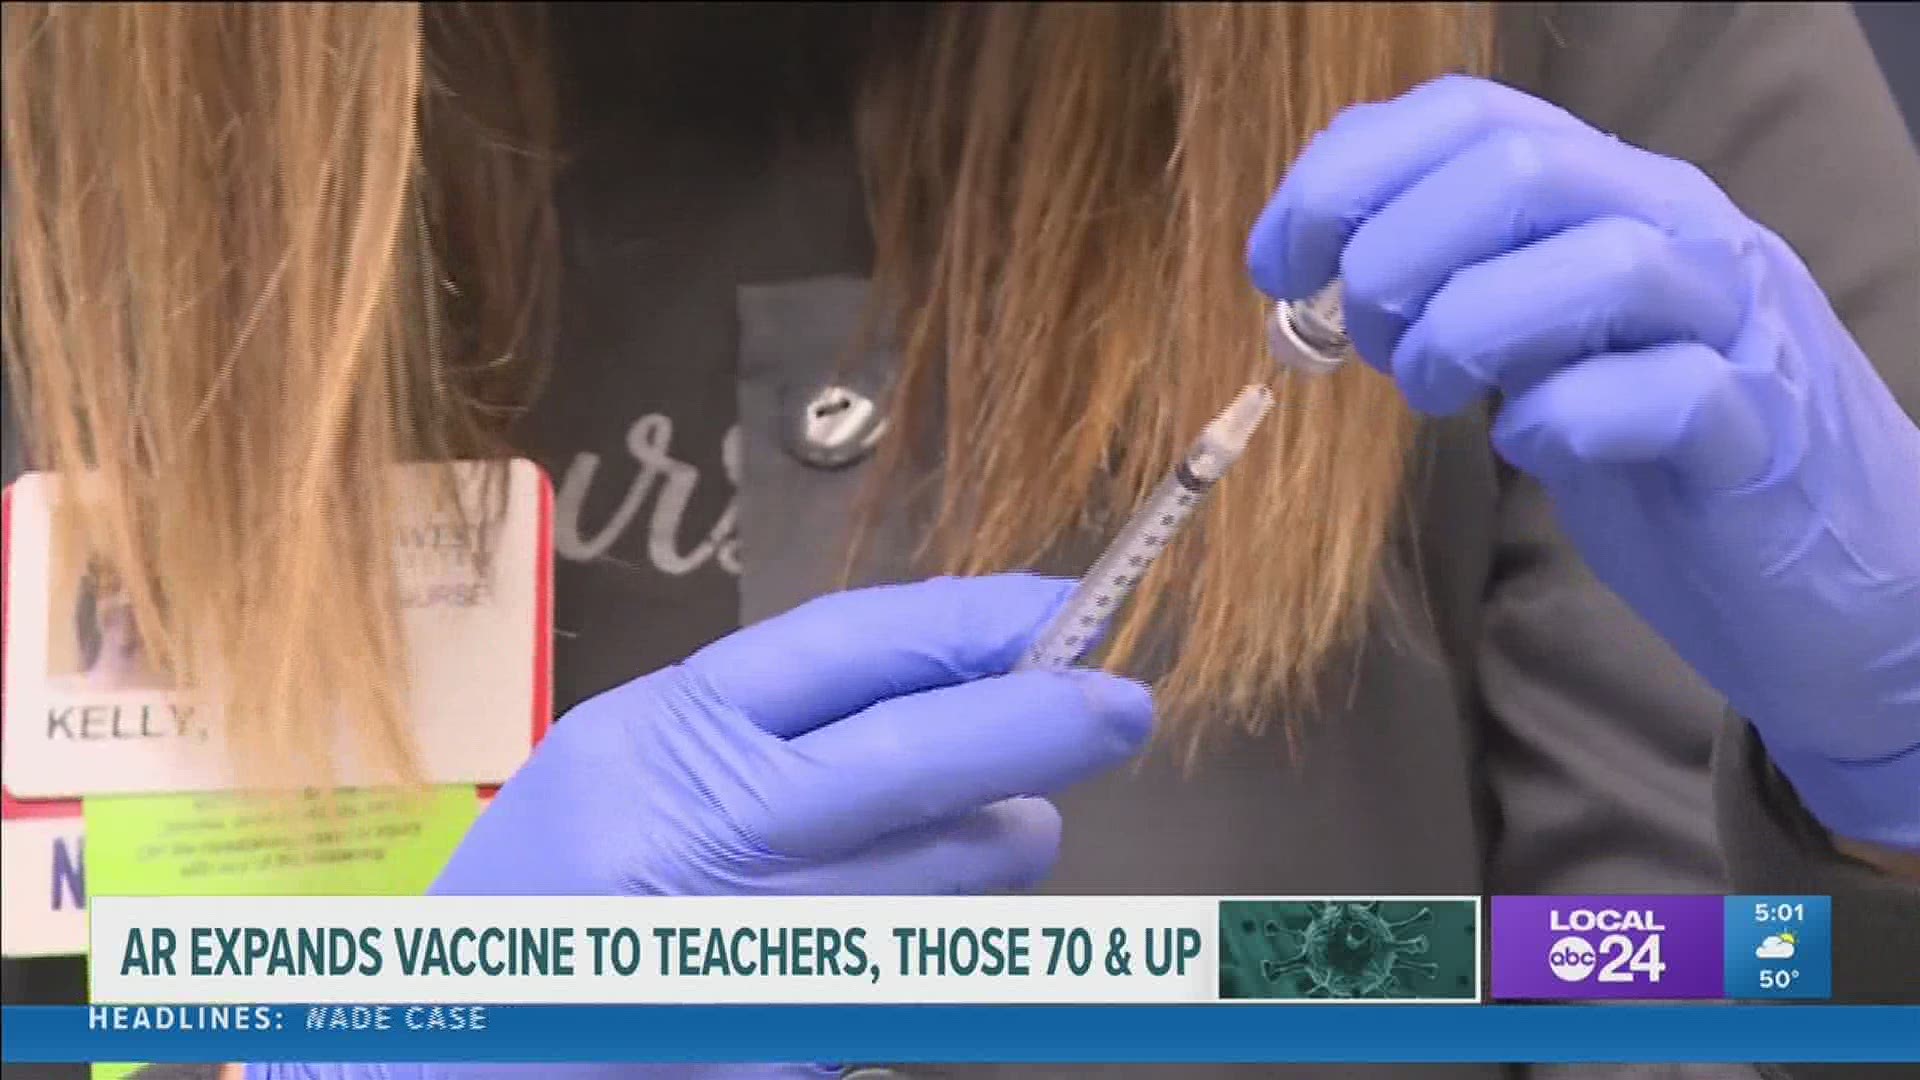 Teachers and people aged 70 and older will be able to get the coronavirus vaccine in Arkansas starting next week.